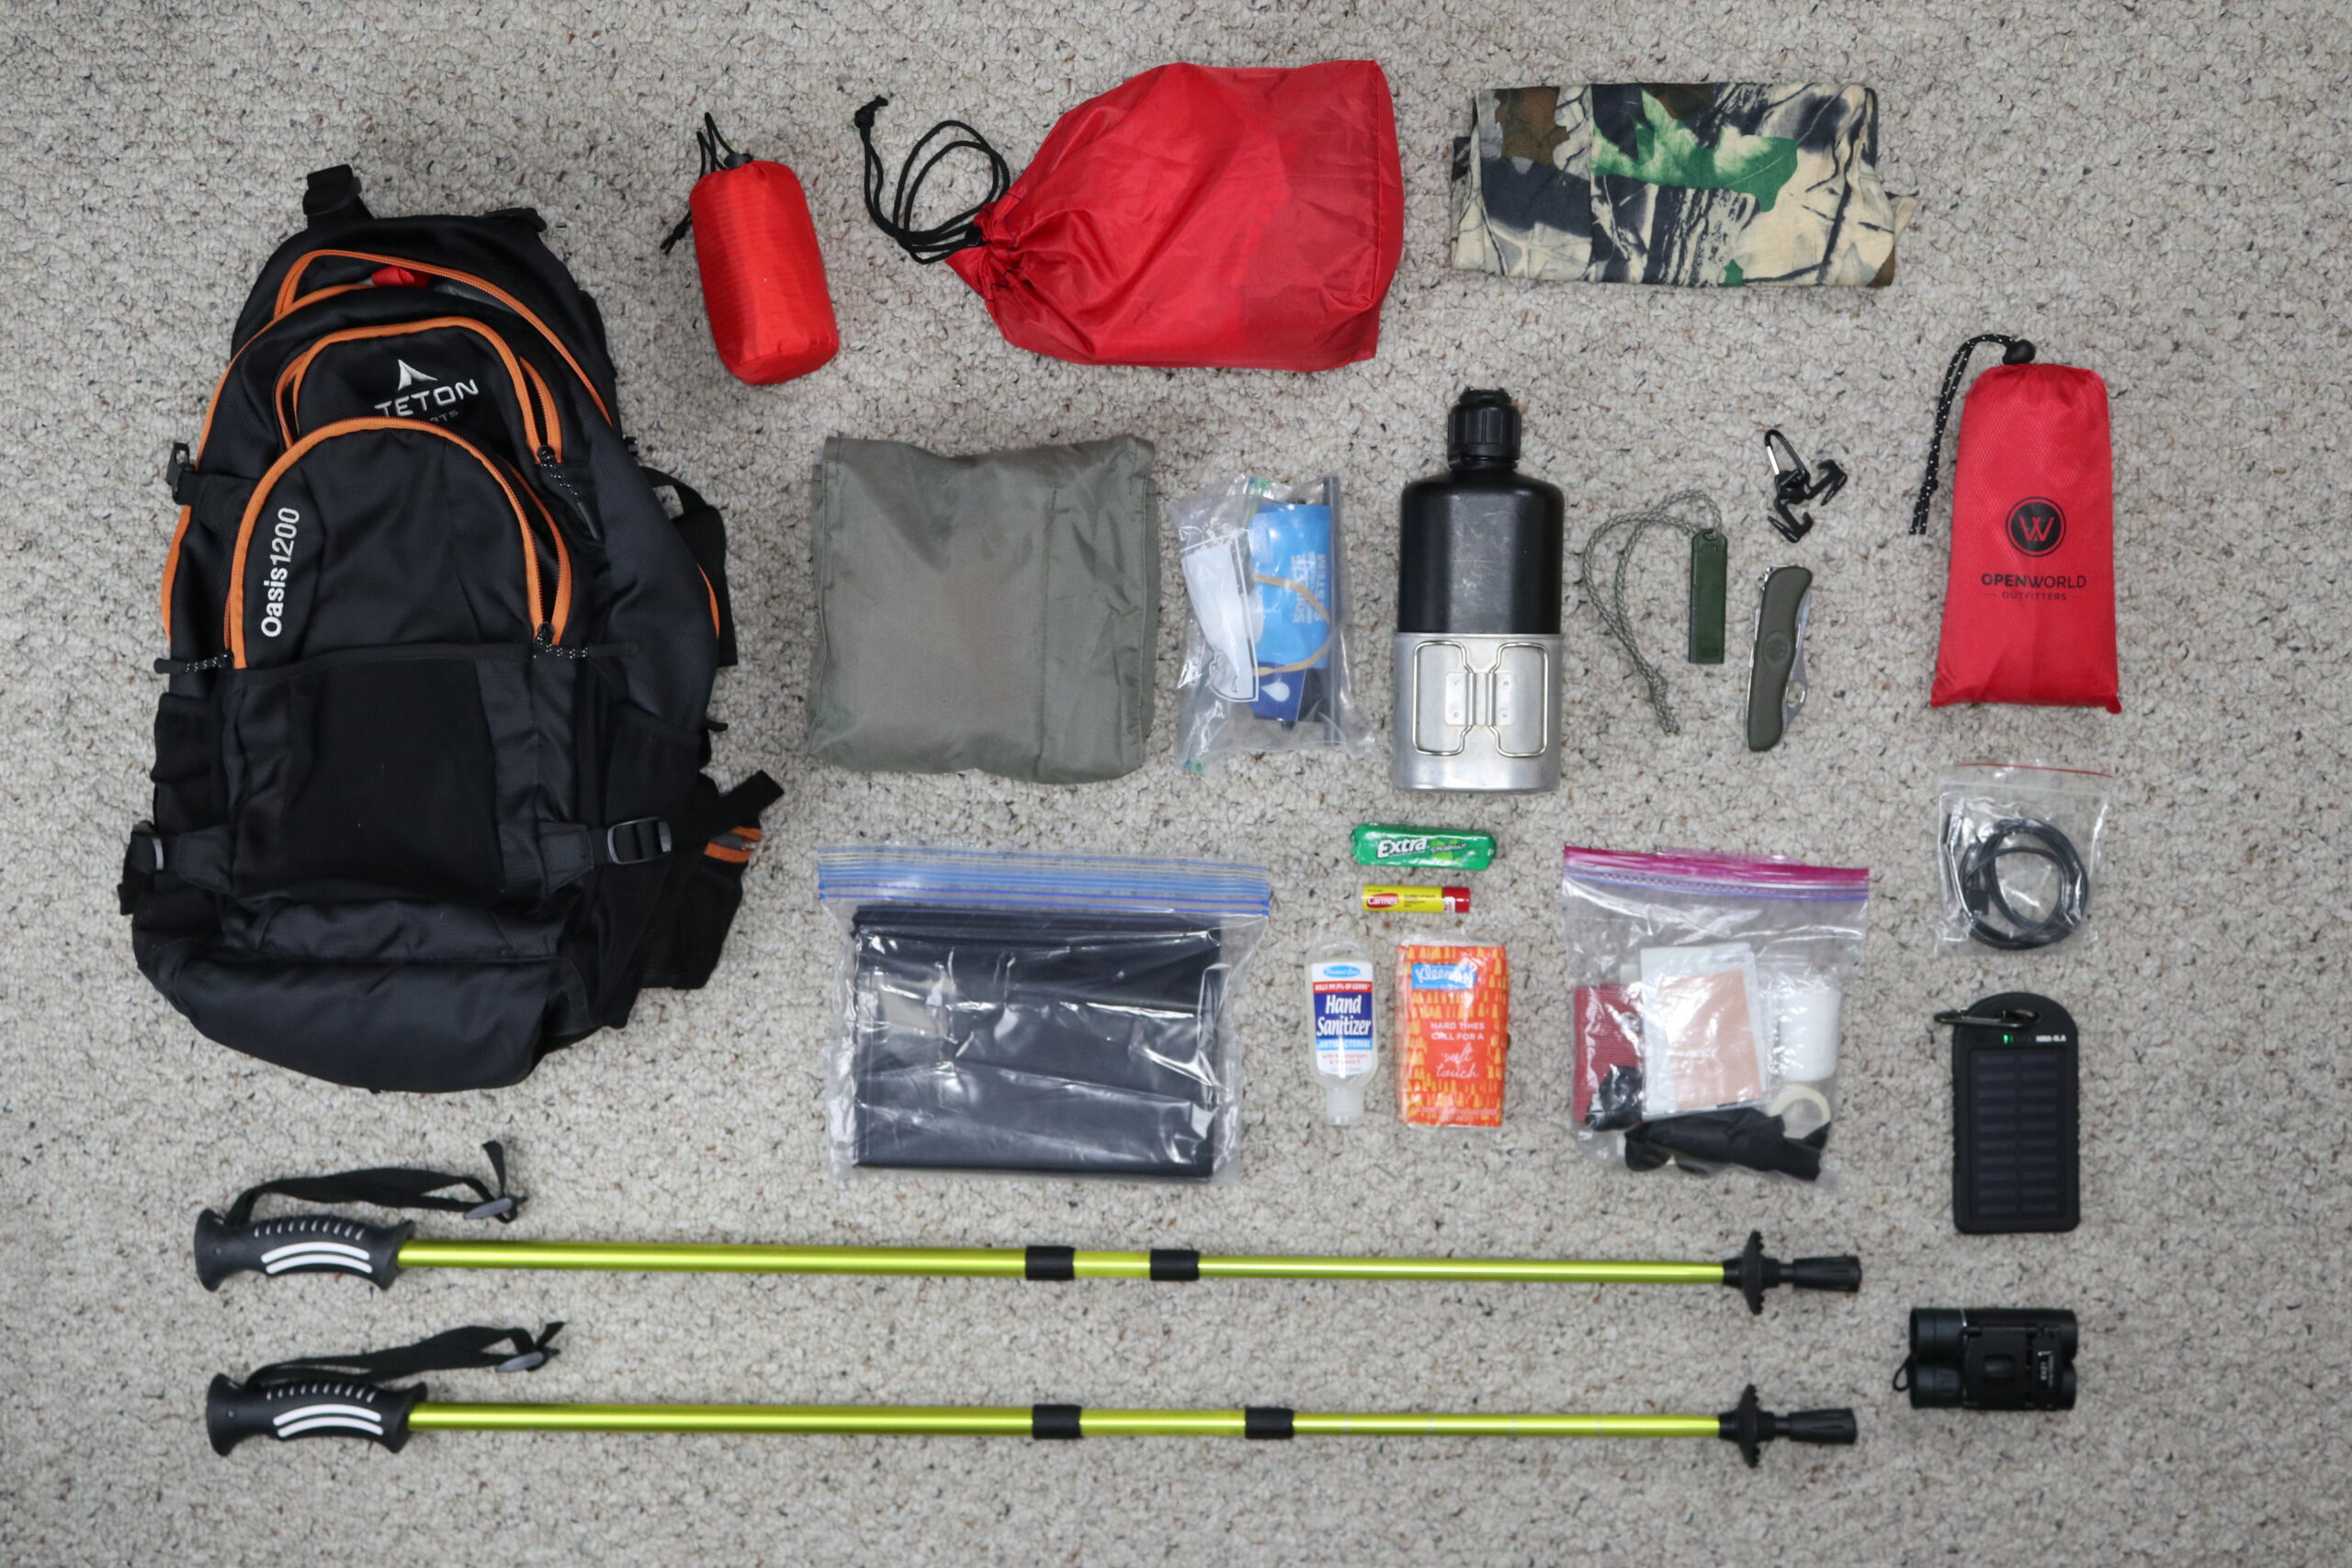 The Day Hike Gear We Carry, Every Time - Be Ready Every Day